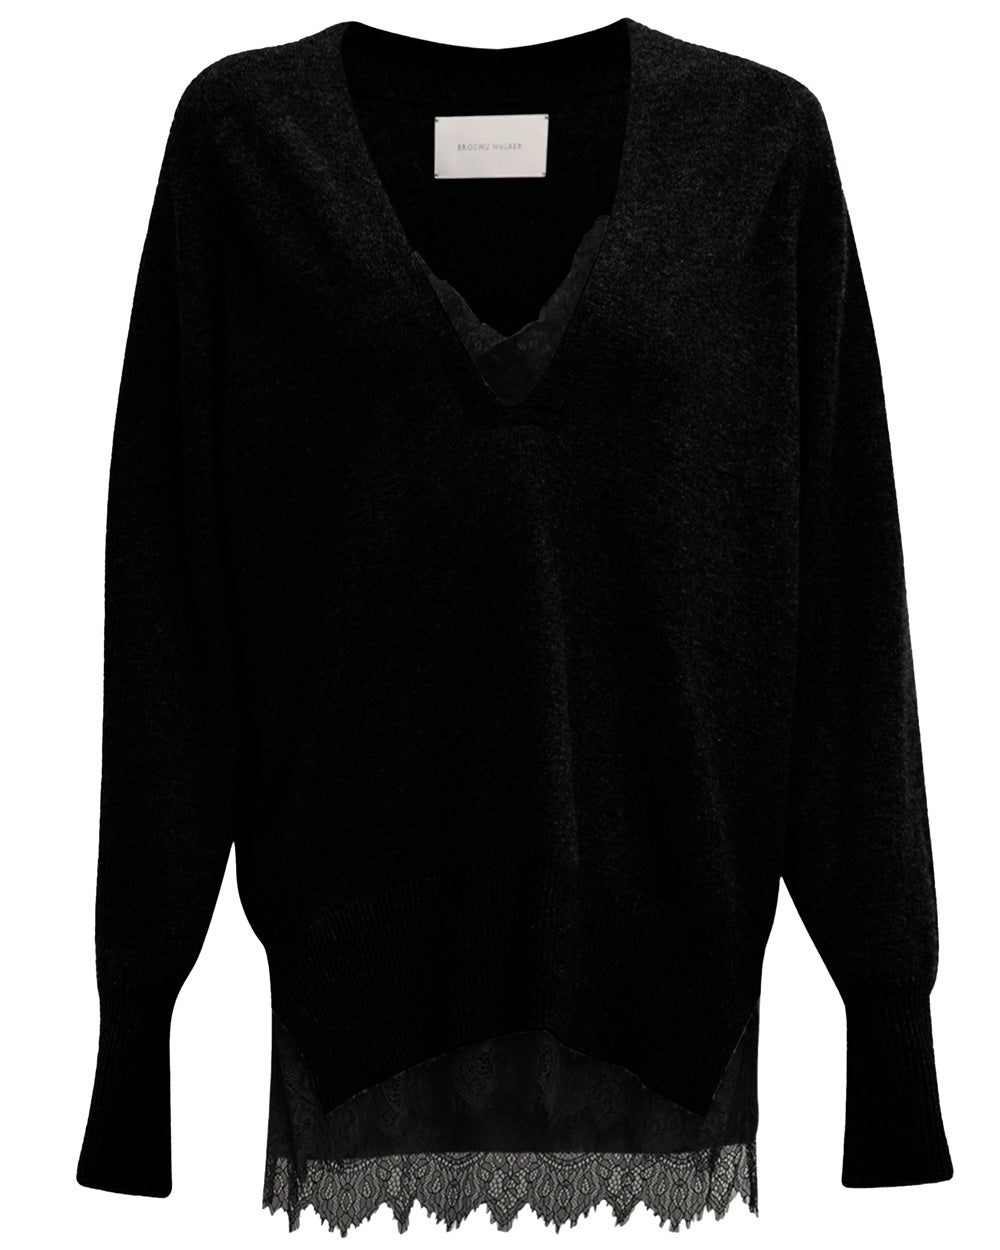 Black Onyx Lace Layered Vee Pullover